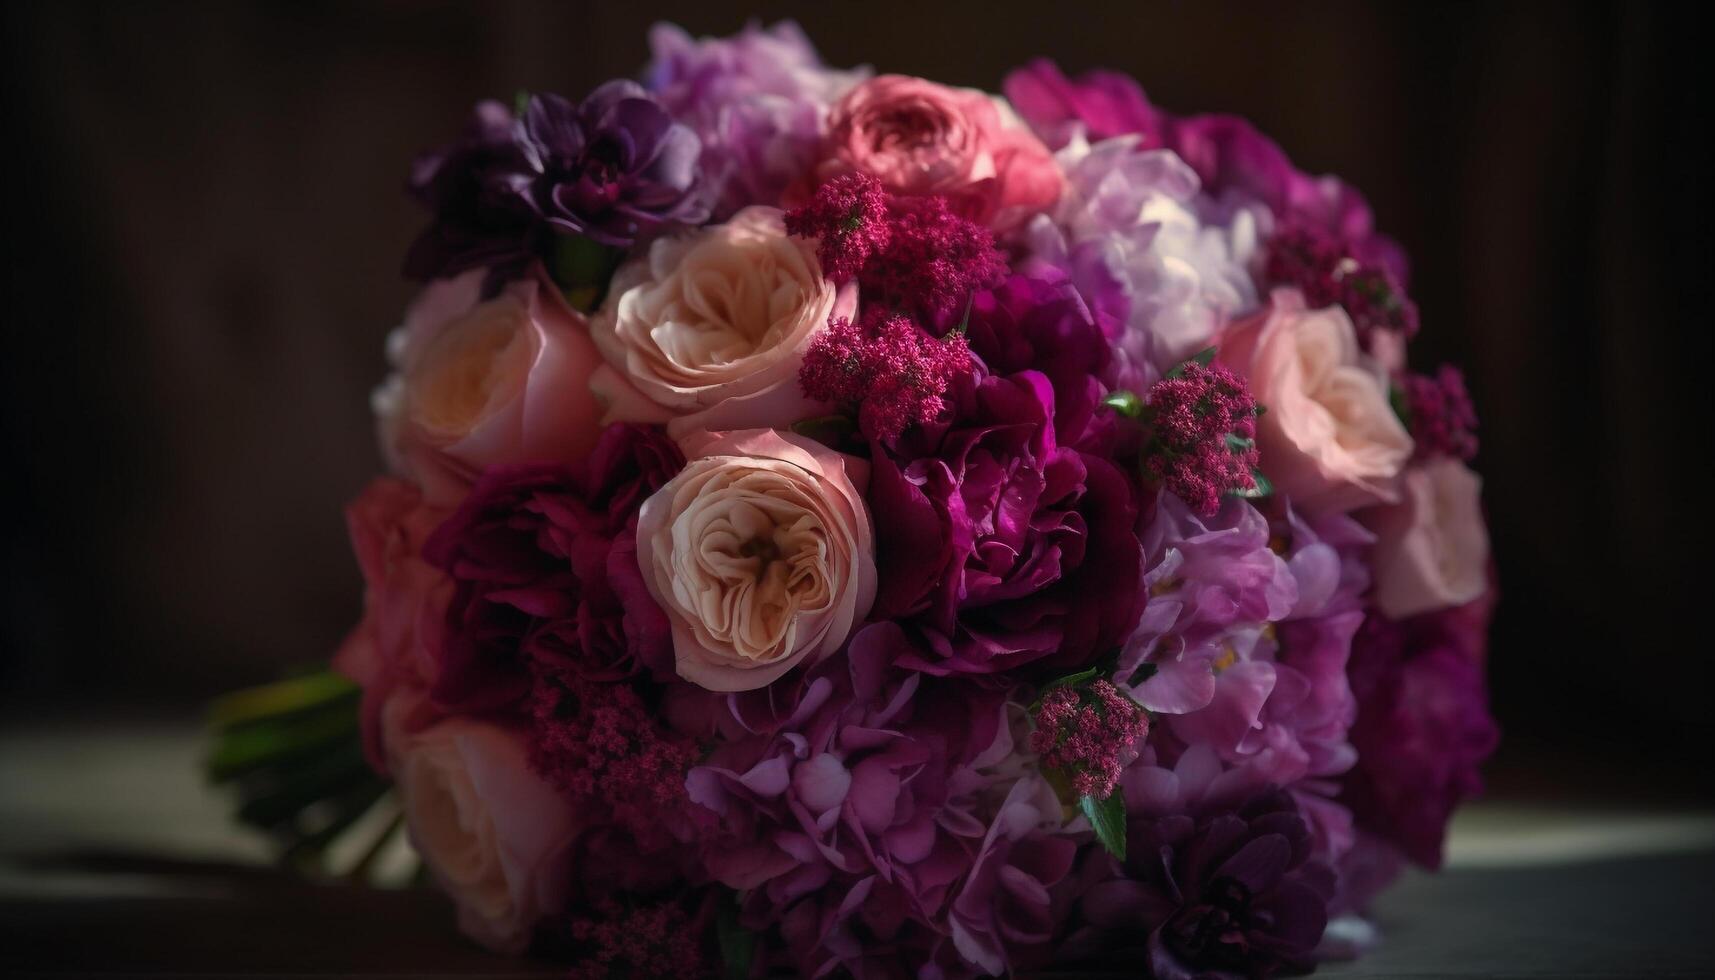 Romantic bouquet of fresh flowers for wedding celebration generated by AI photo